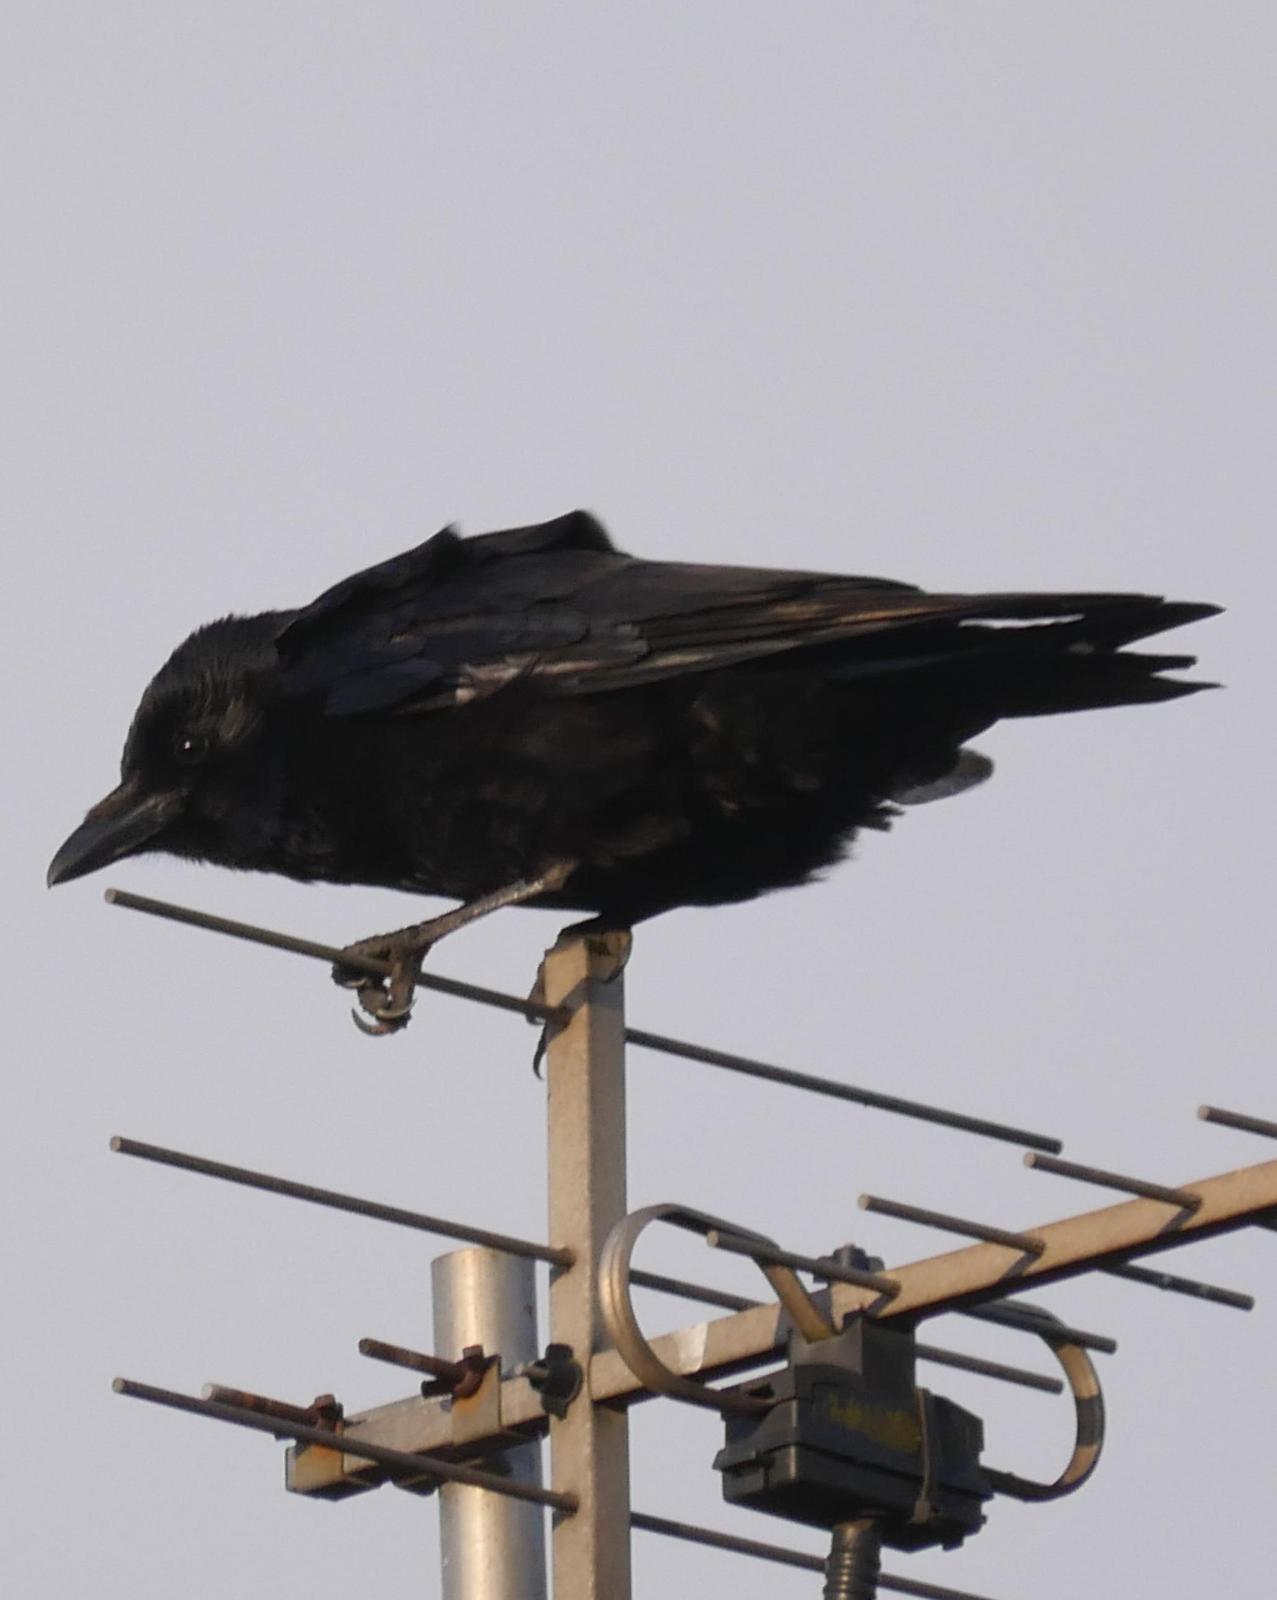 Carrion Crow Photo by Peter Lowe